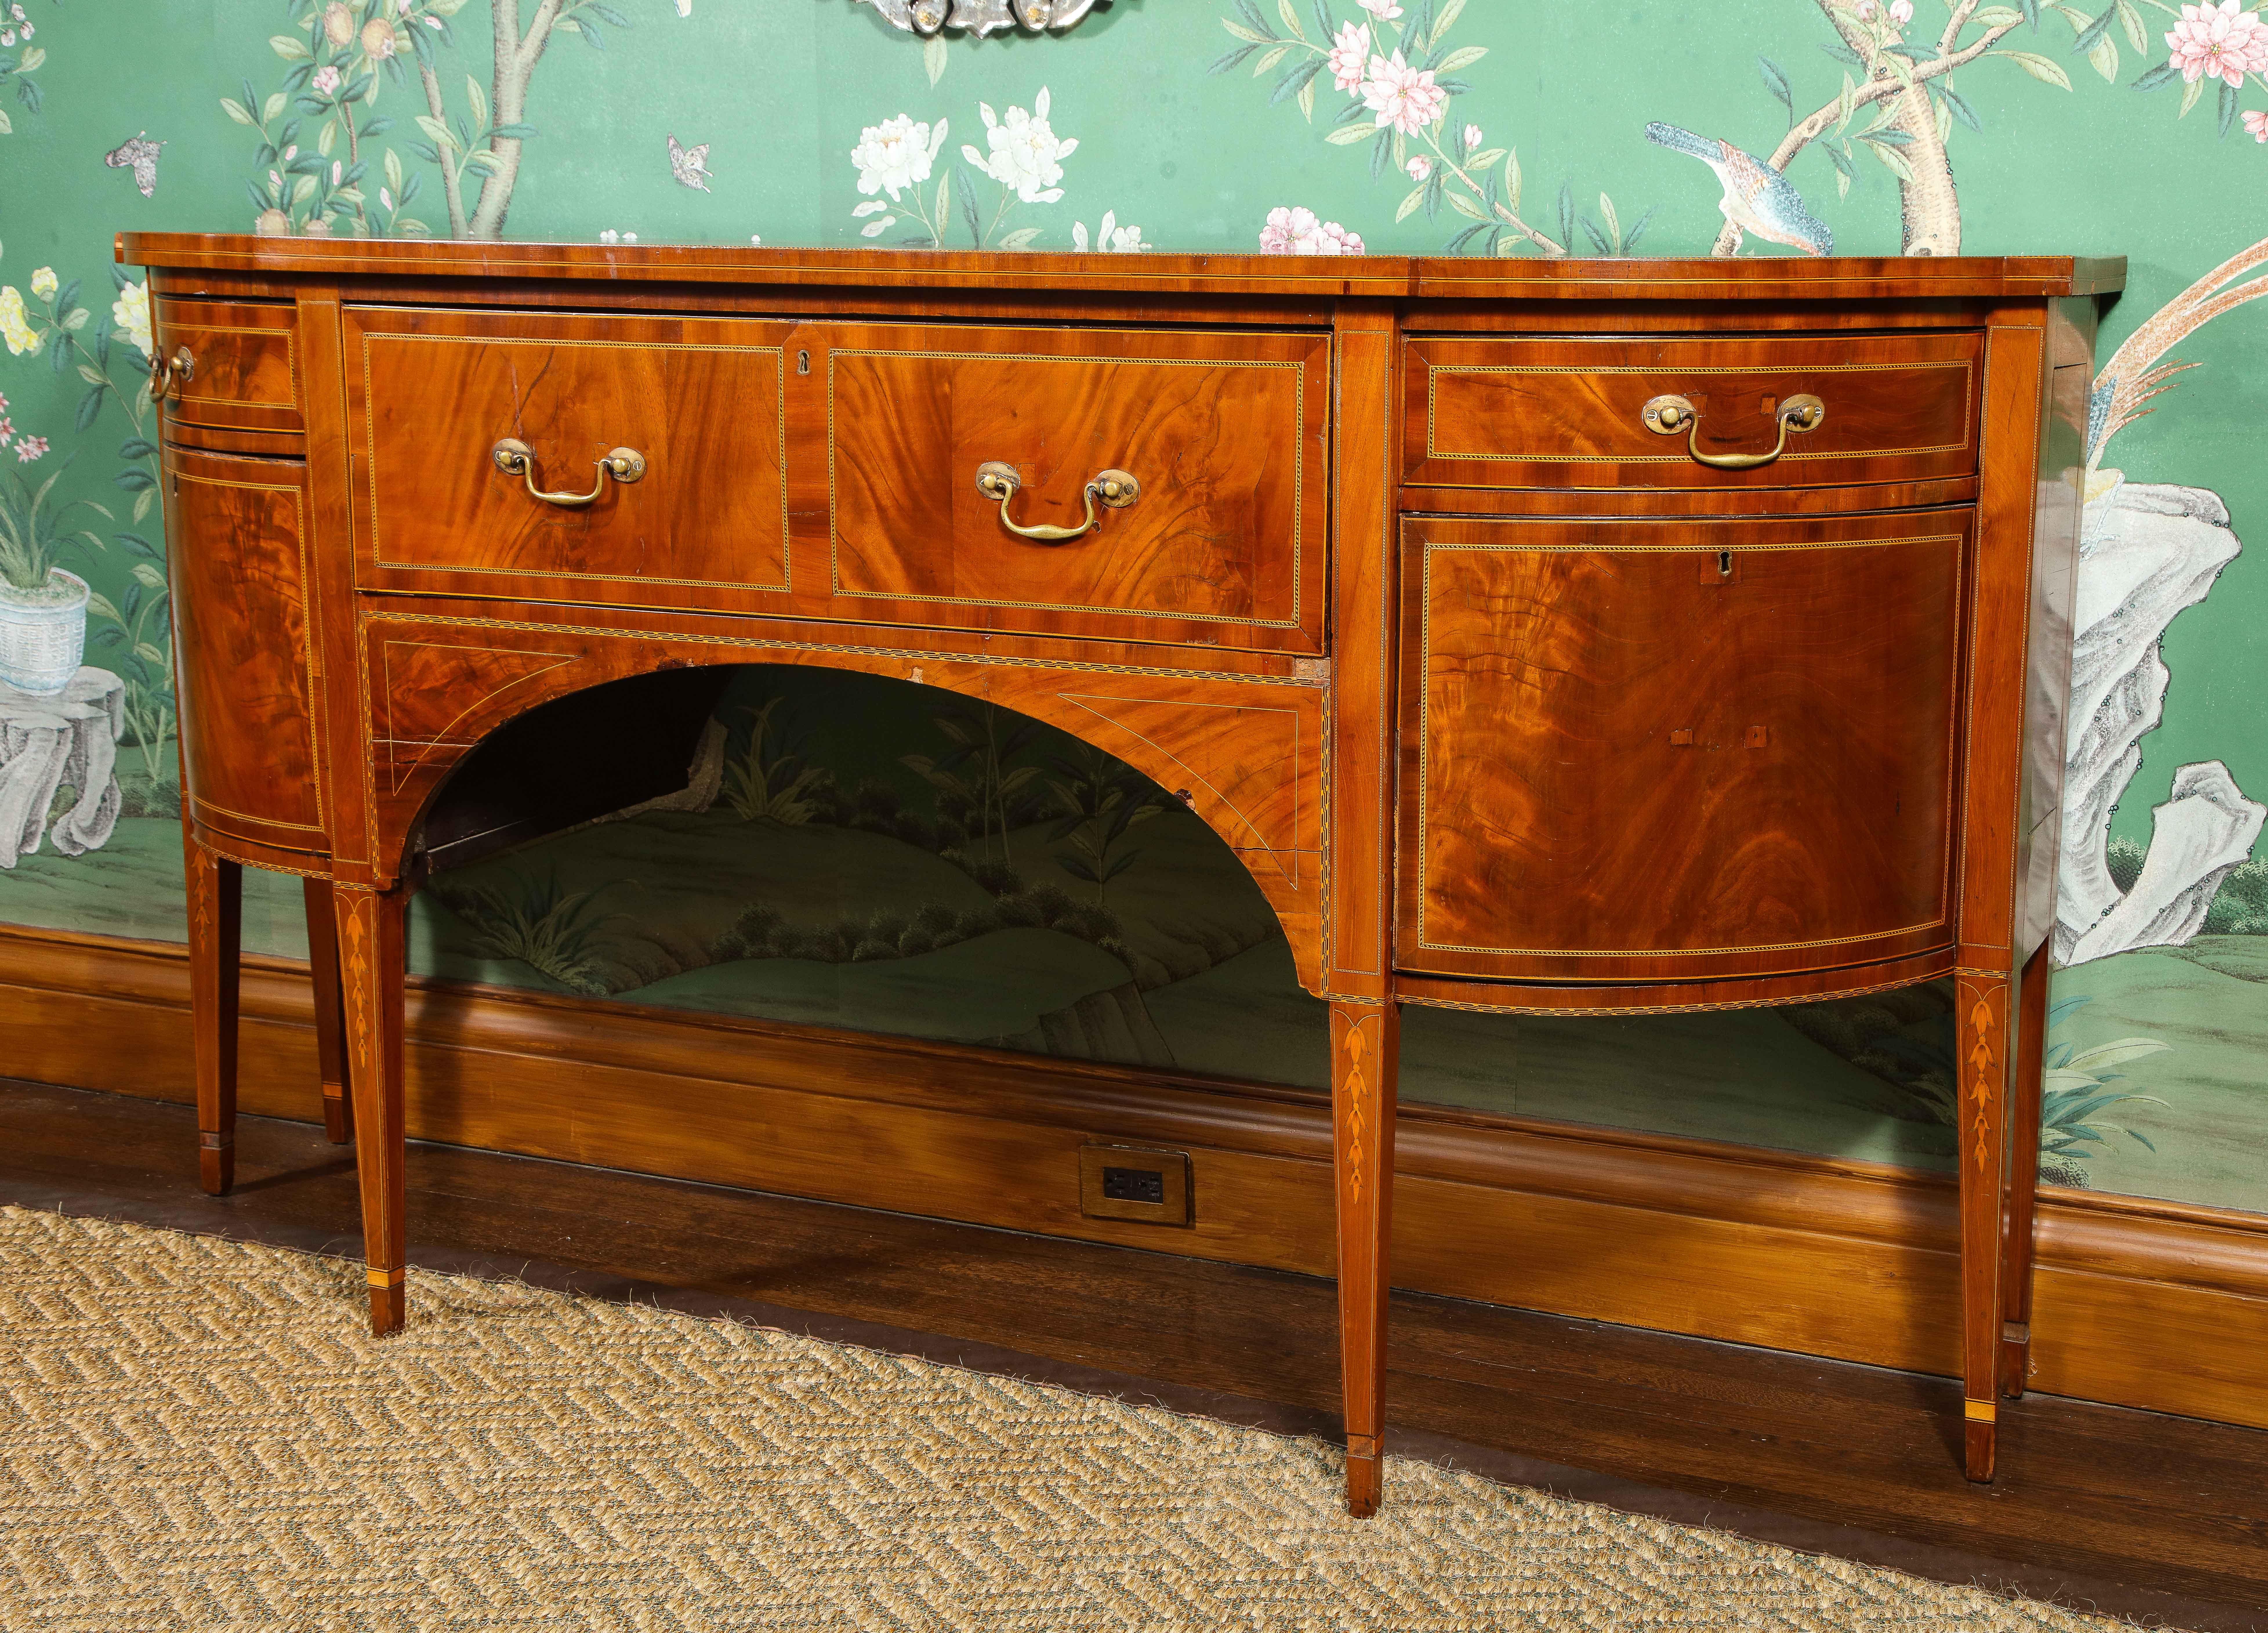 19th Century George III Style Parquetry Inlaid Bowfront Mahogany Buffet For Sale 3